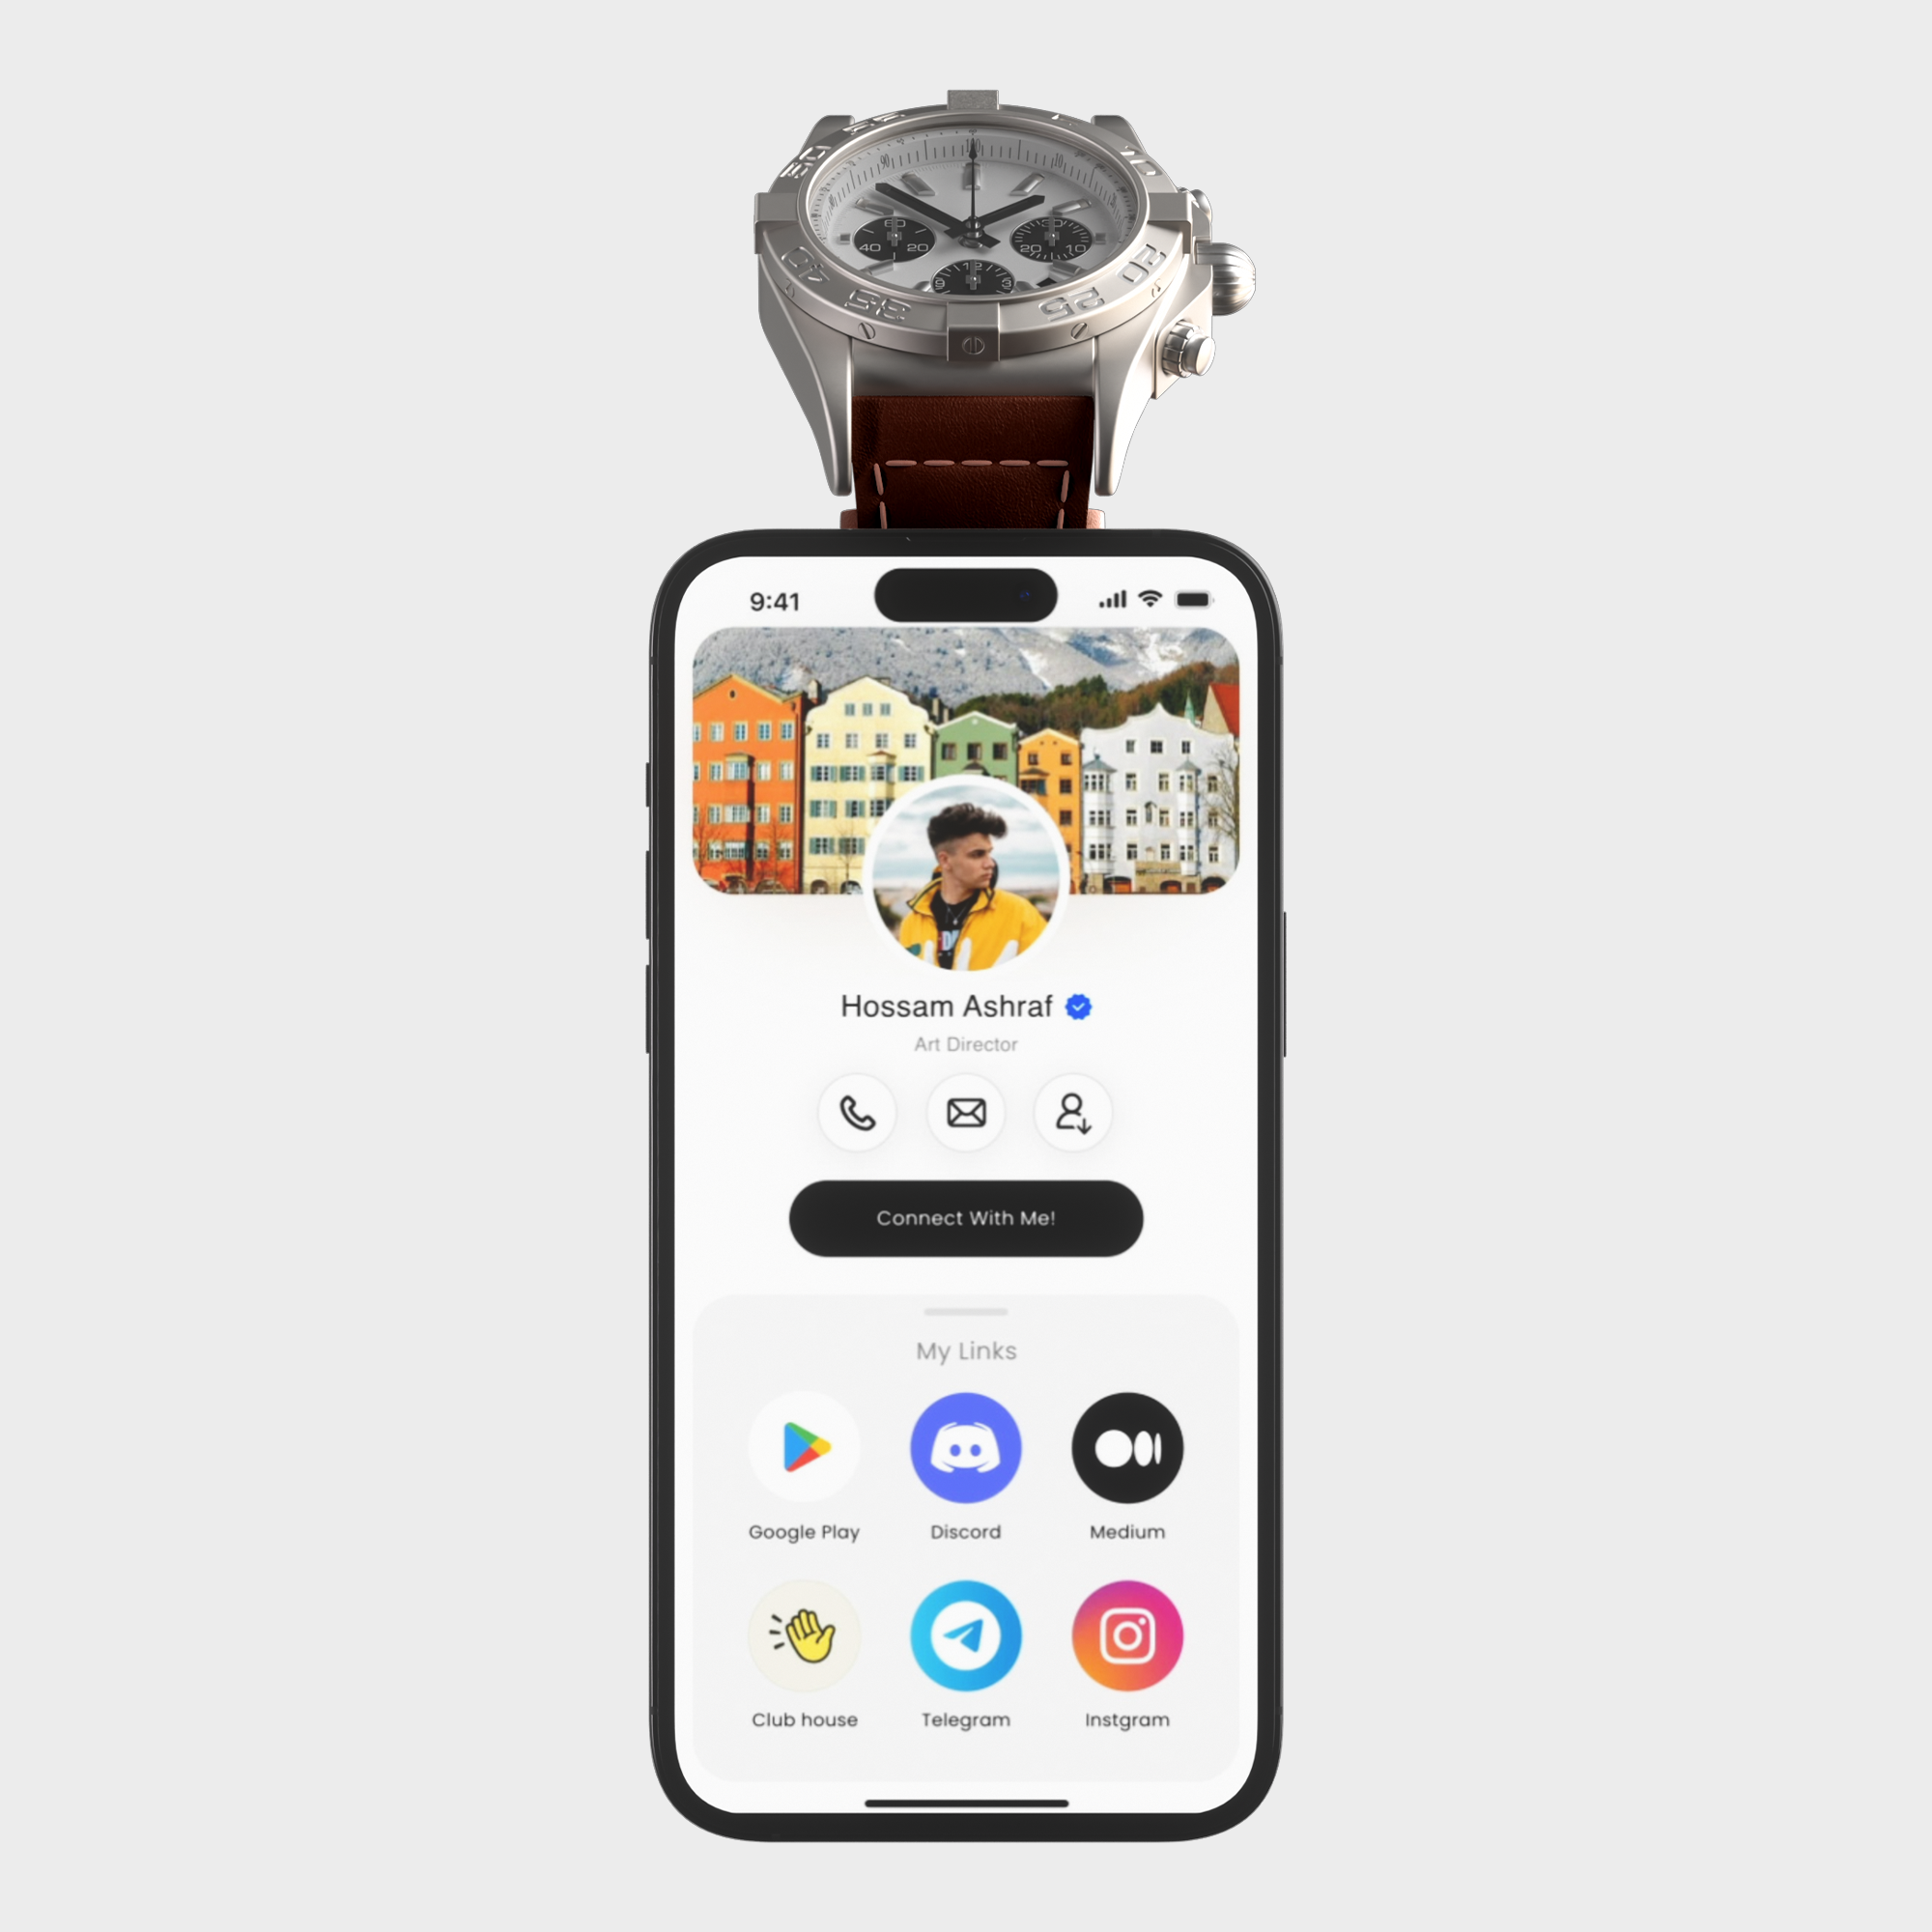 Luxury watch resting on top of a smartphone showing a personal profile with social media icons.